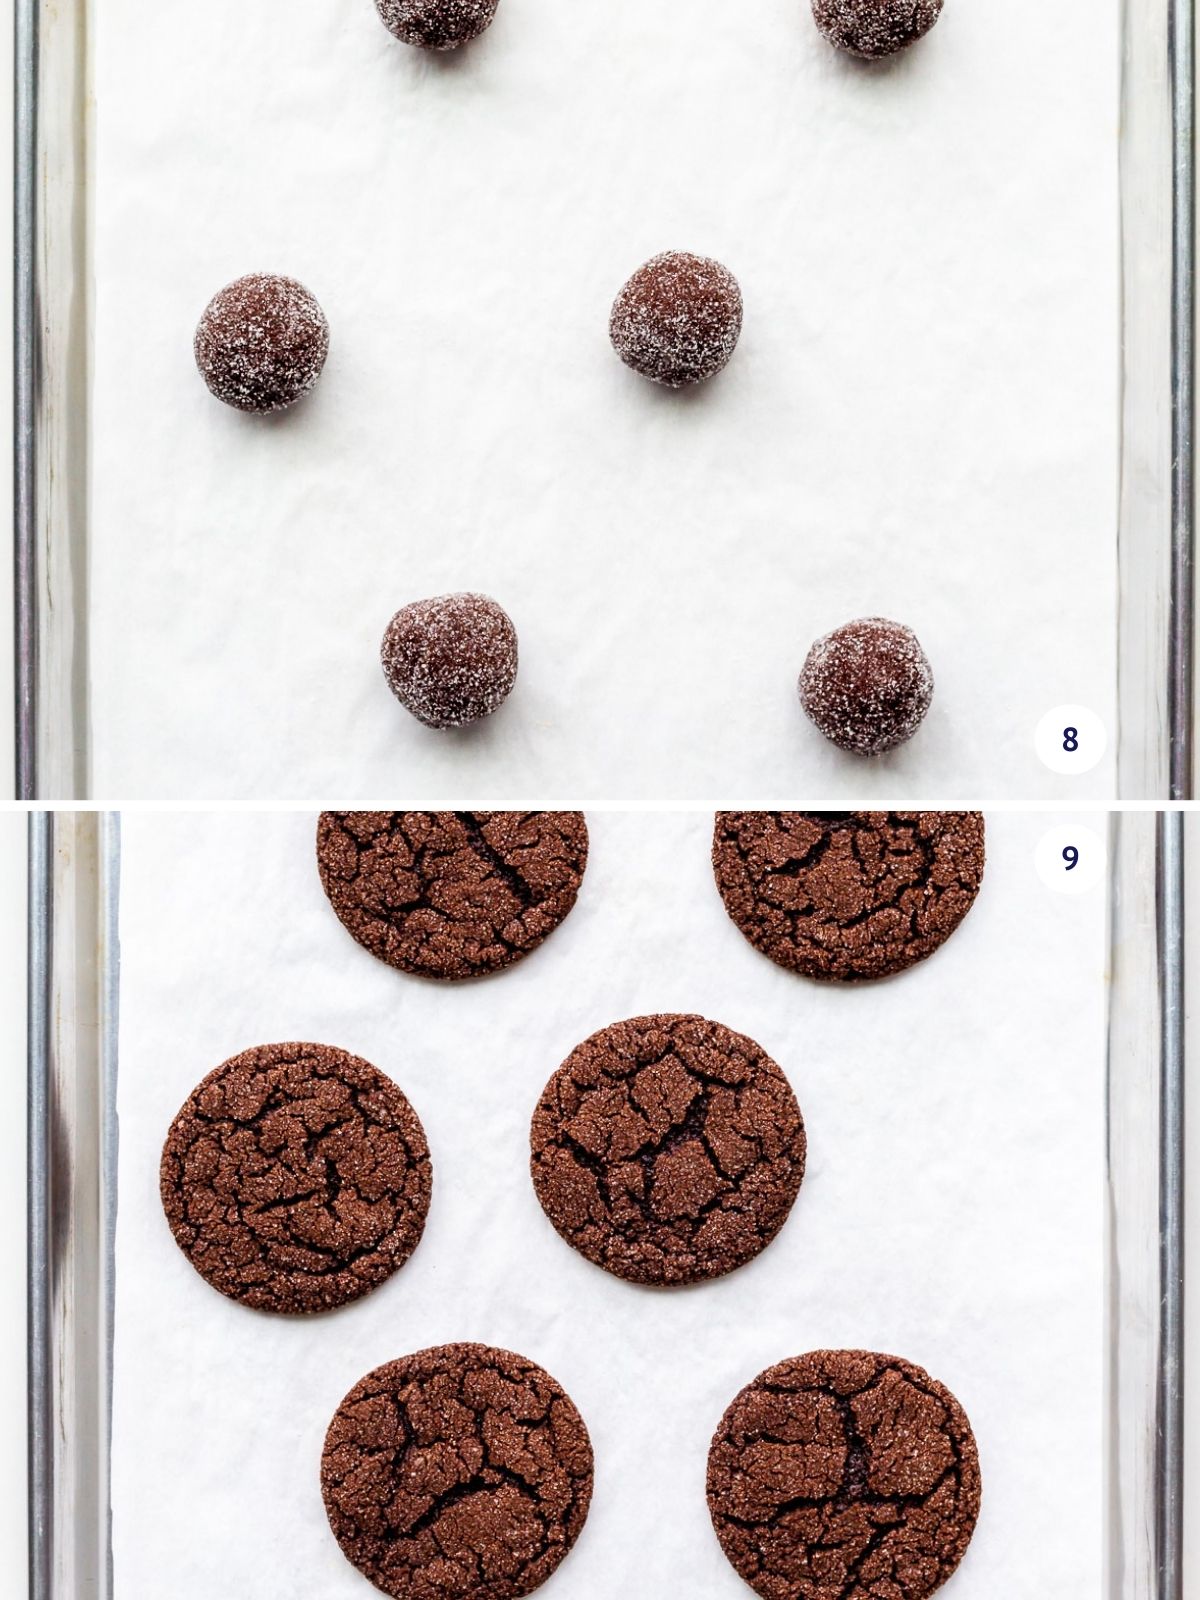 Chocolate sugar cookies before and after baking to show how they crack and sparkle.